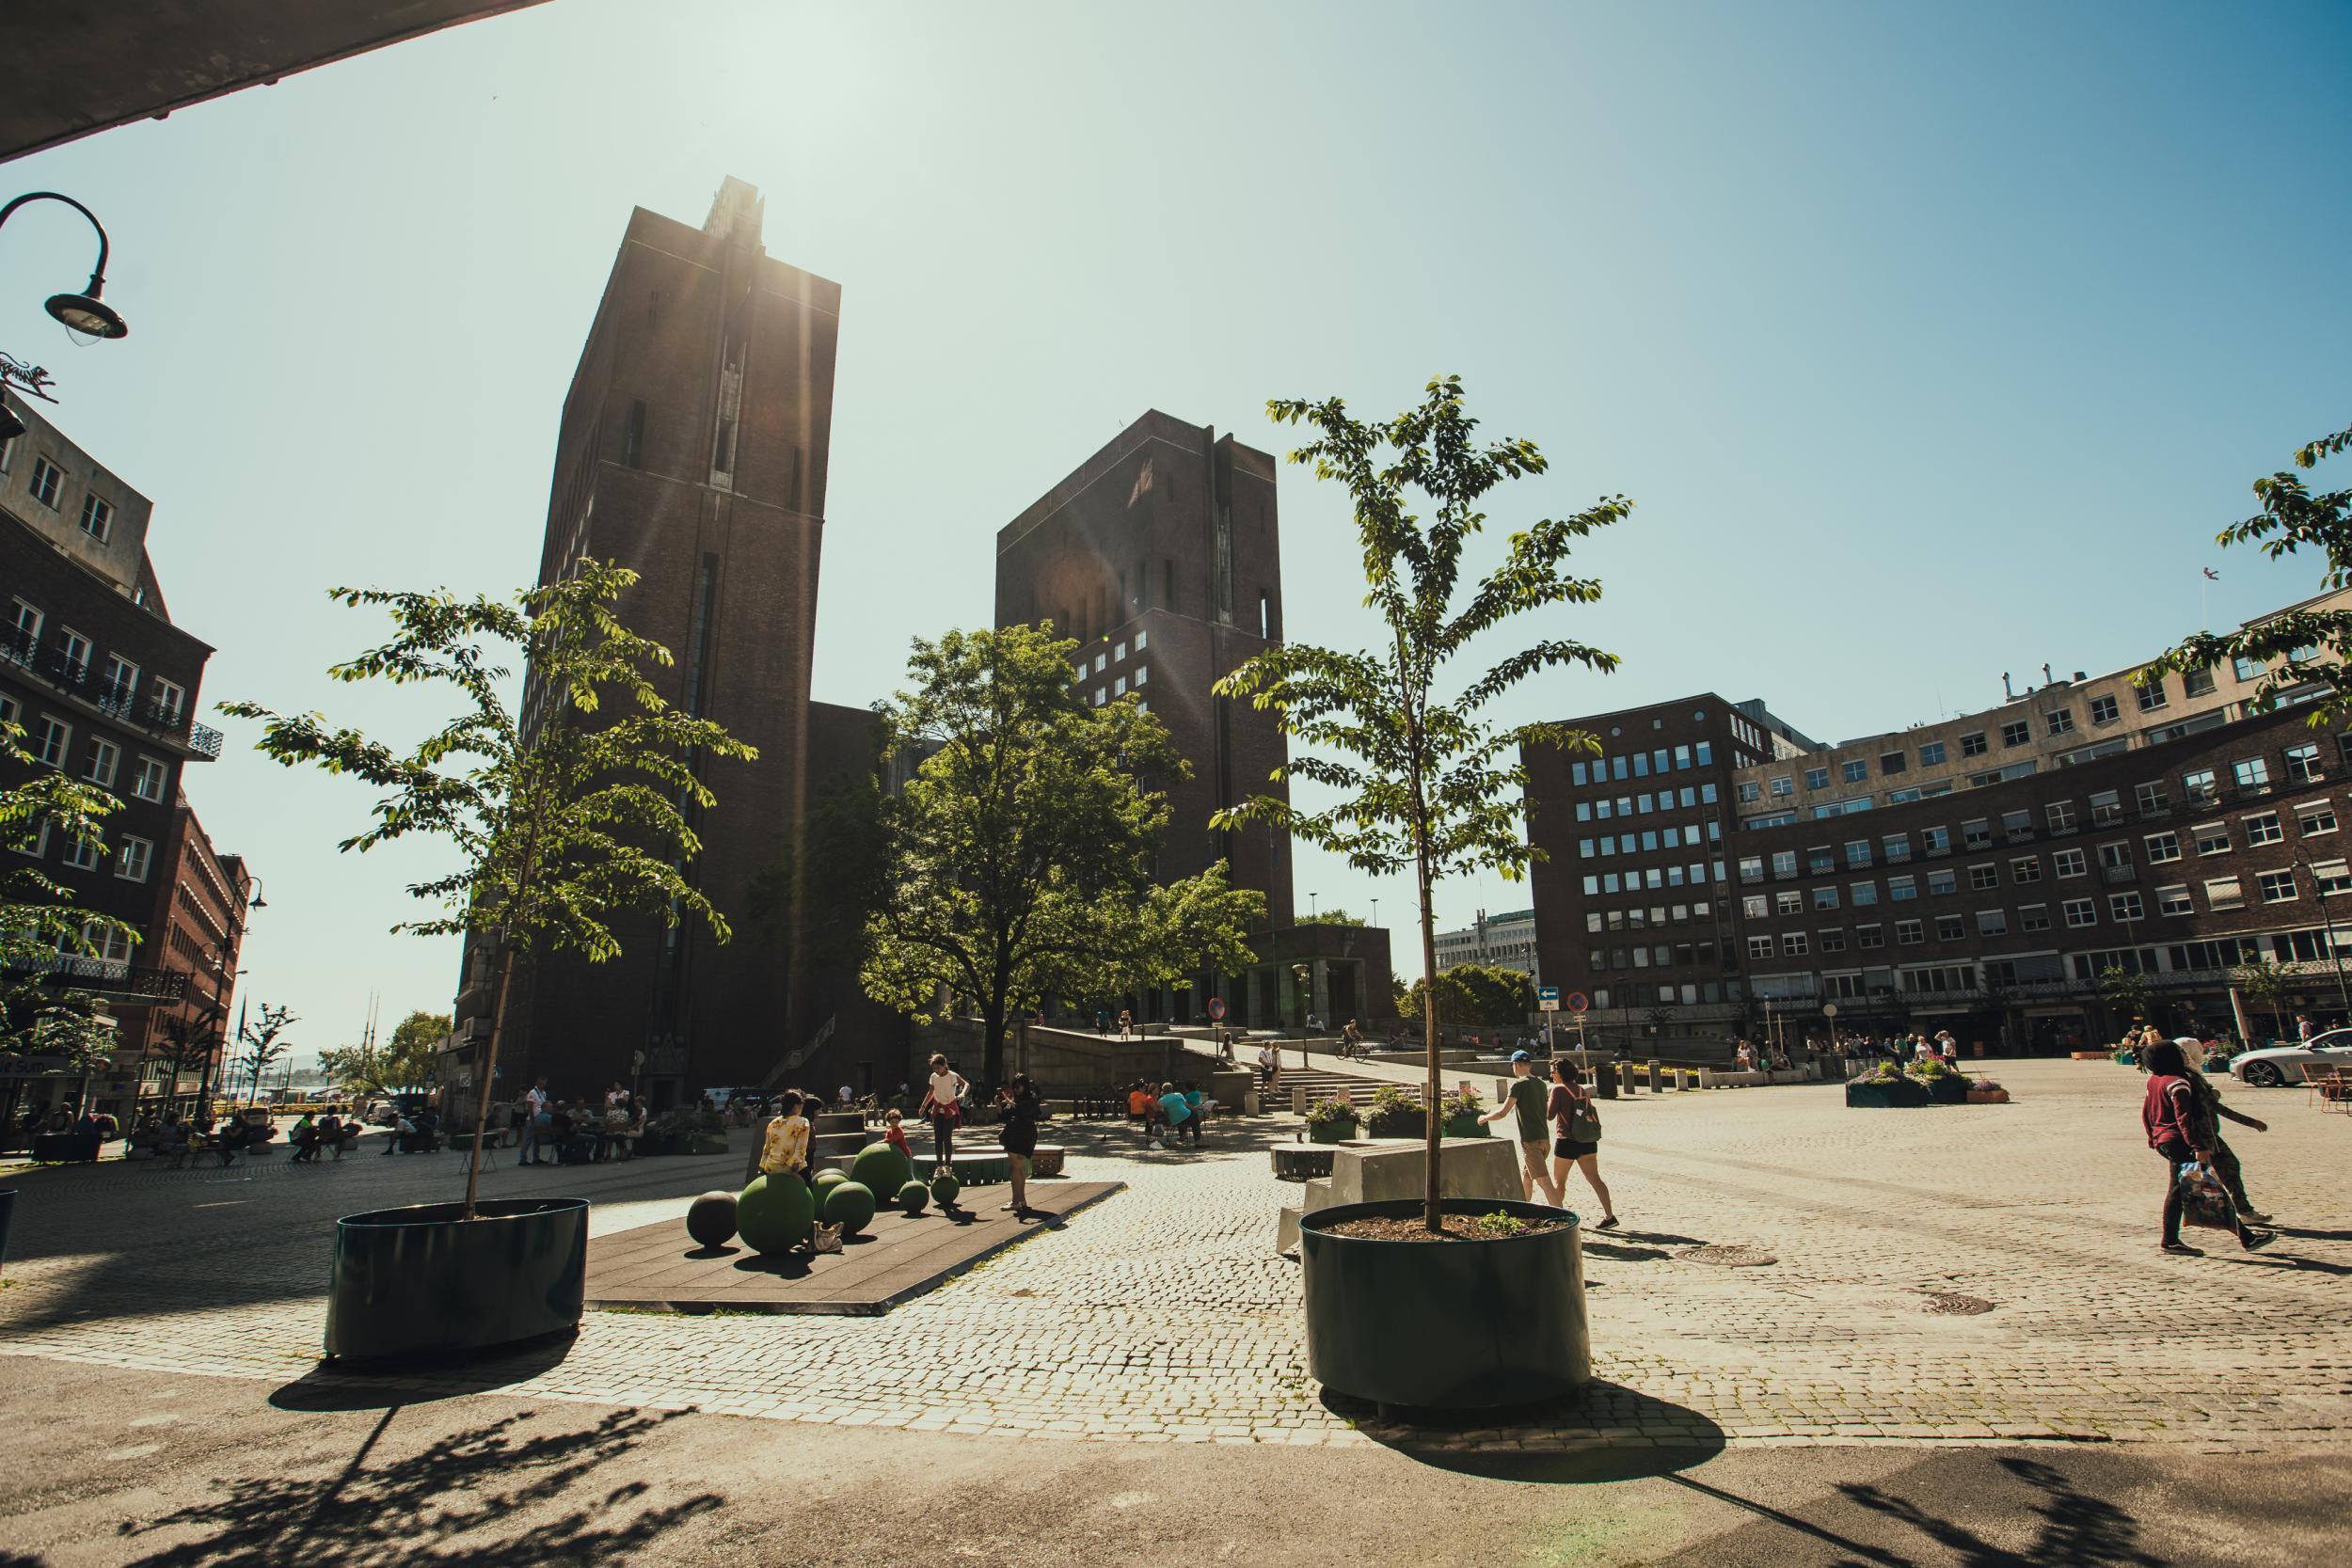 Oslo is set to be the first major European capital entirely without cars